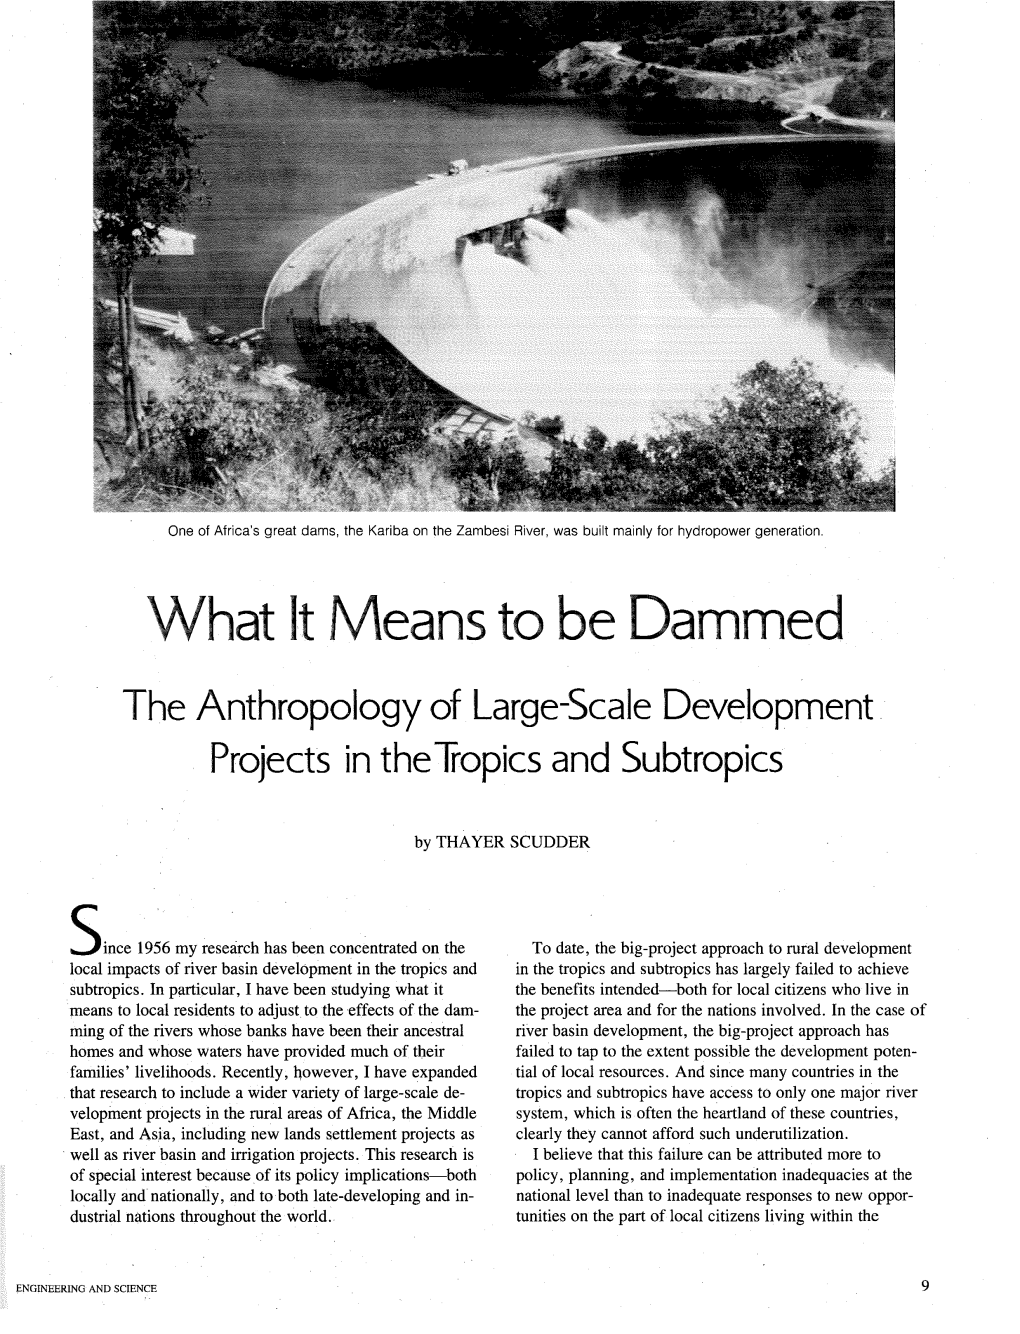 What It Means to Be Dammed: the Anthropology of Large-Scale Development Projects in the Tropics